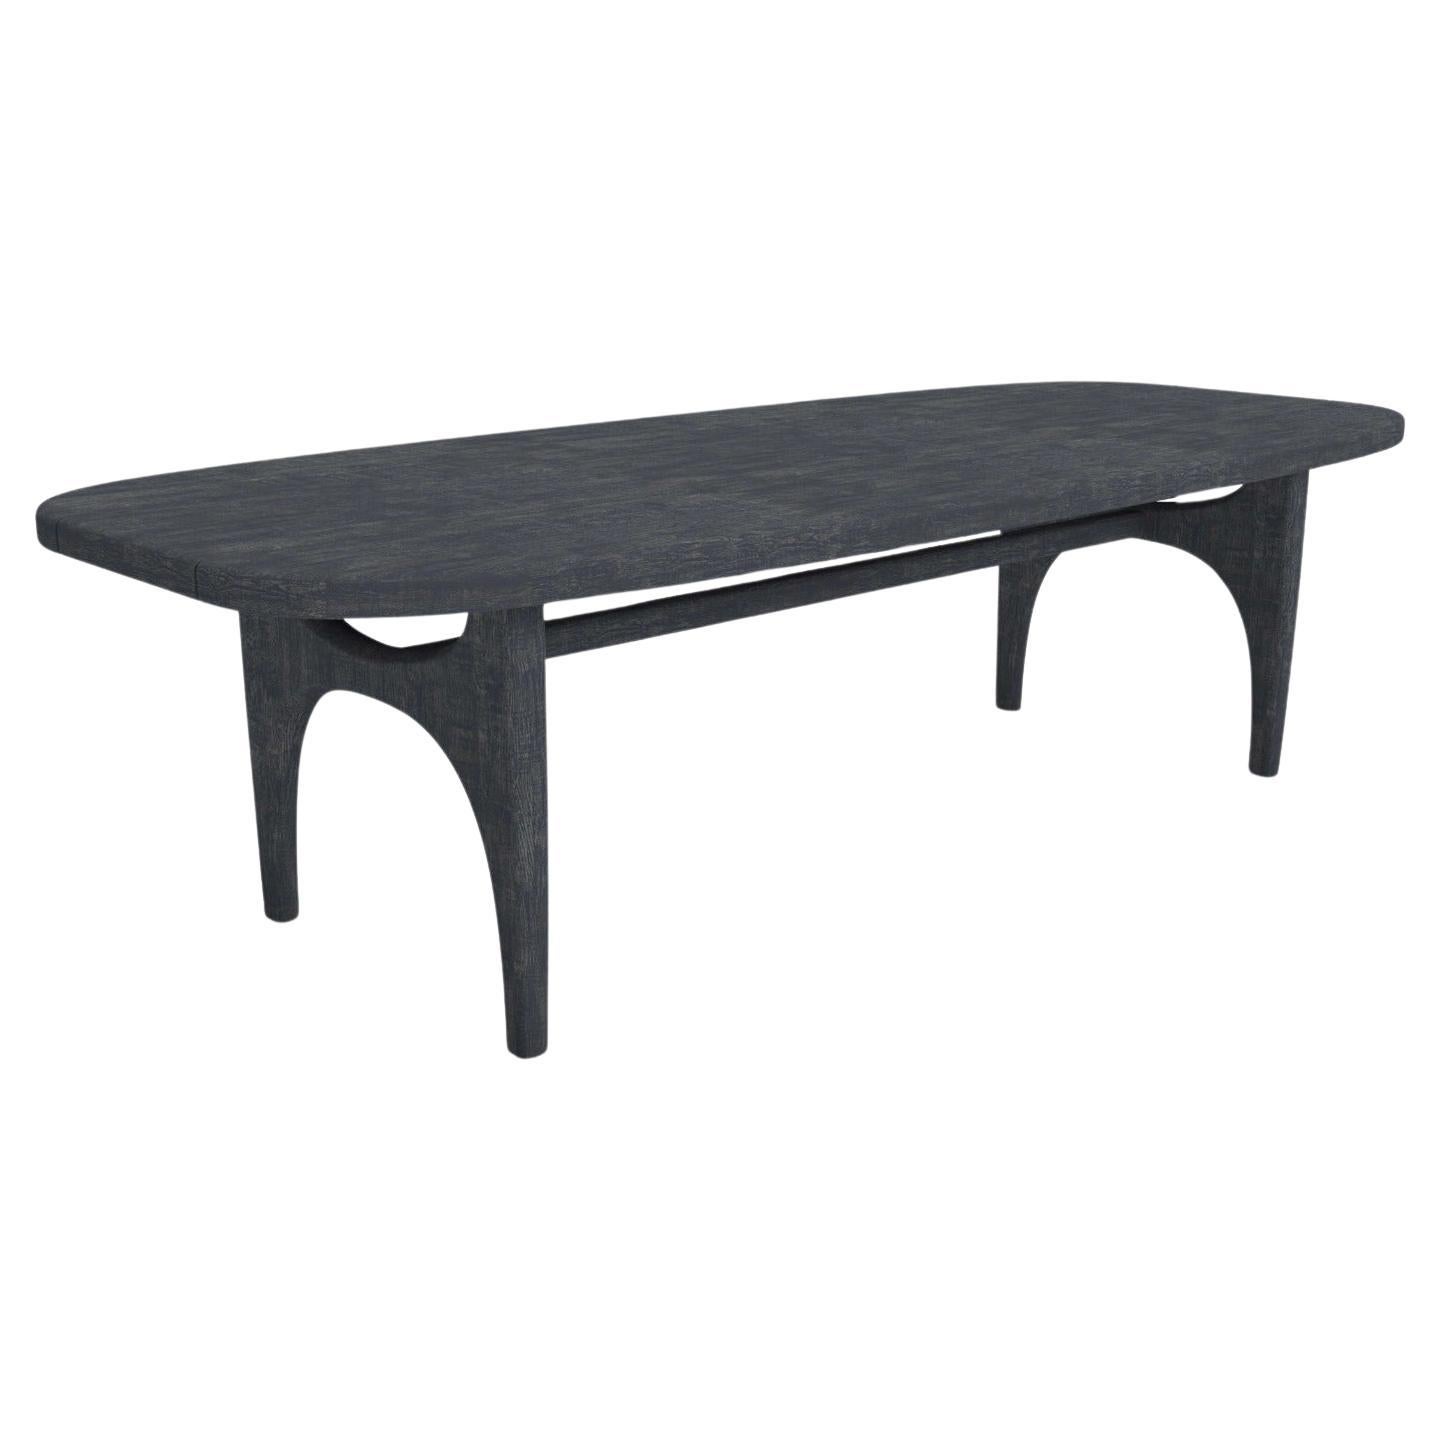 Whale-noche Outdoor Dining Table by SNOC For Sale